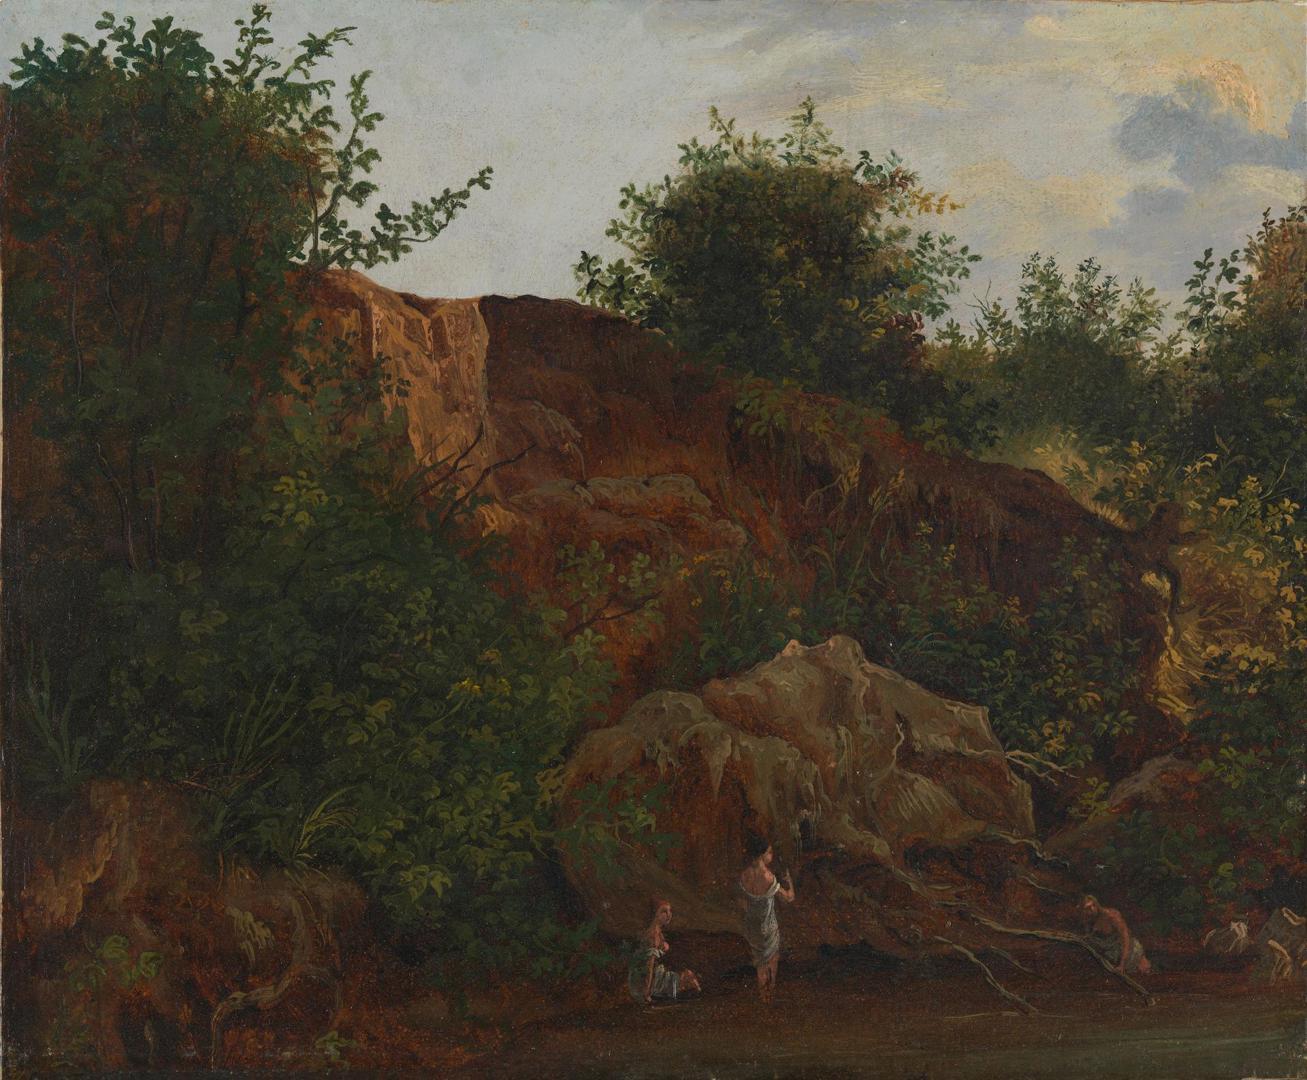 Landscape with Figures bathing by Probably by Johann August Heinrich